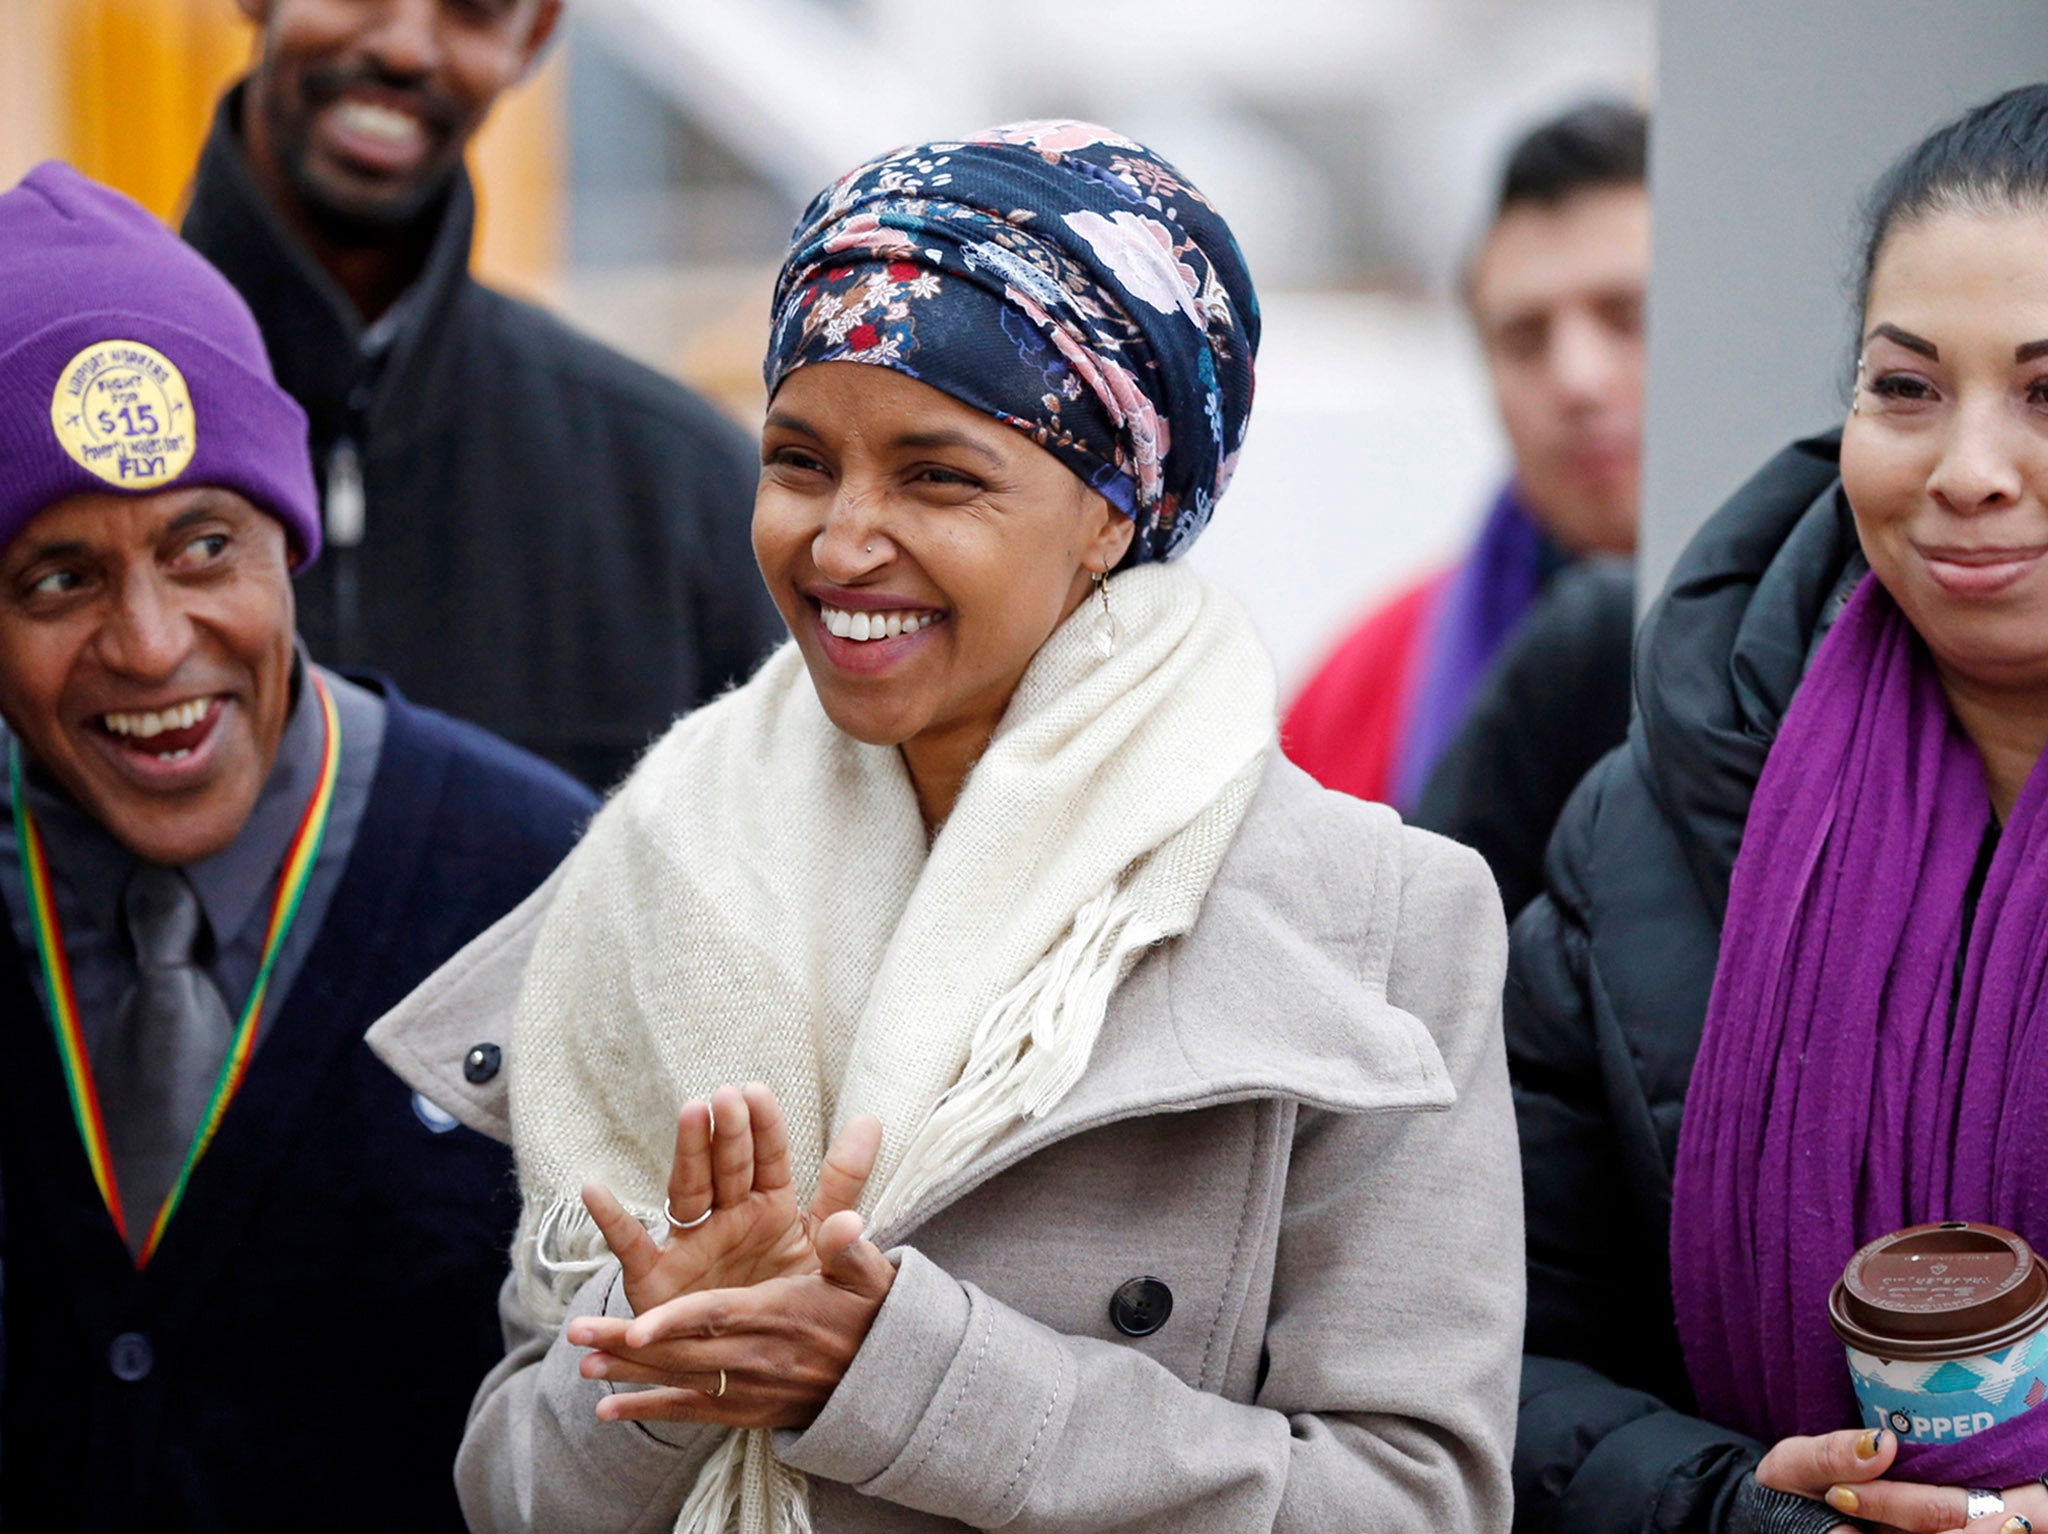 Ilhan Omar is a member of the Minnesota House of Representatives